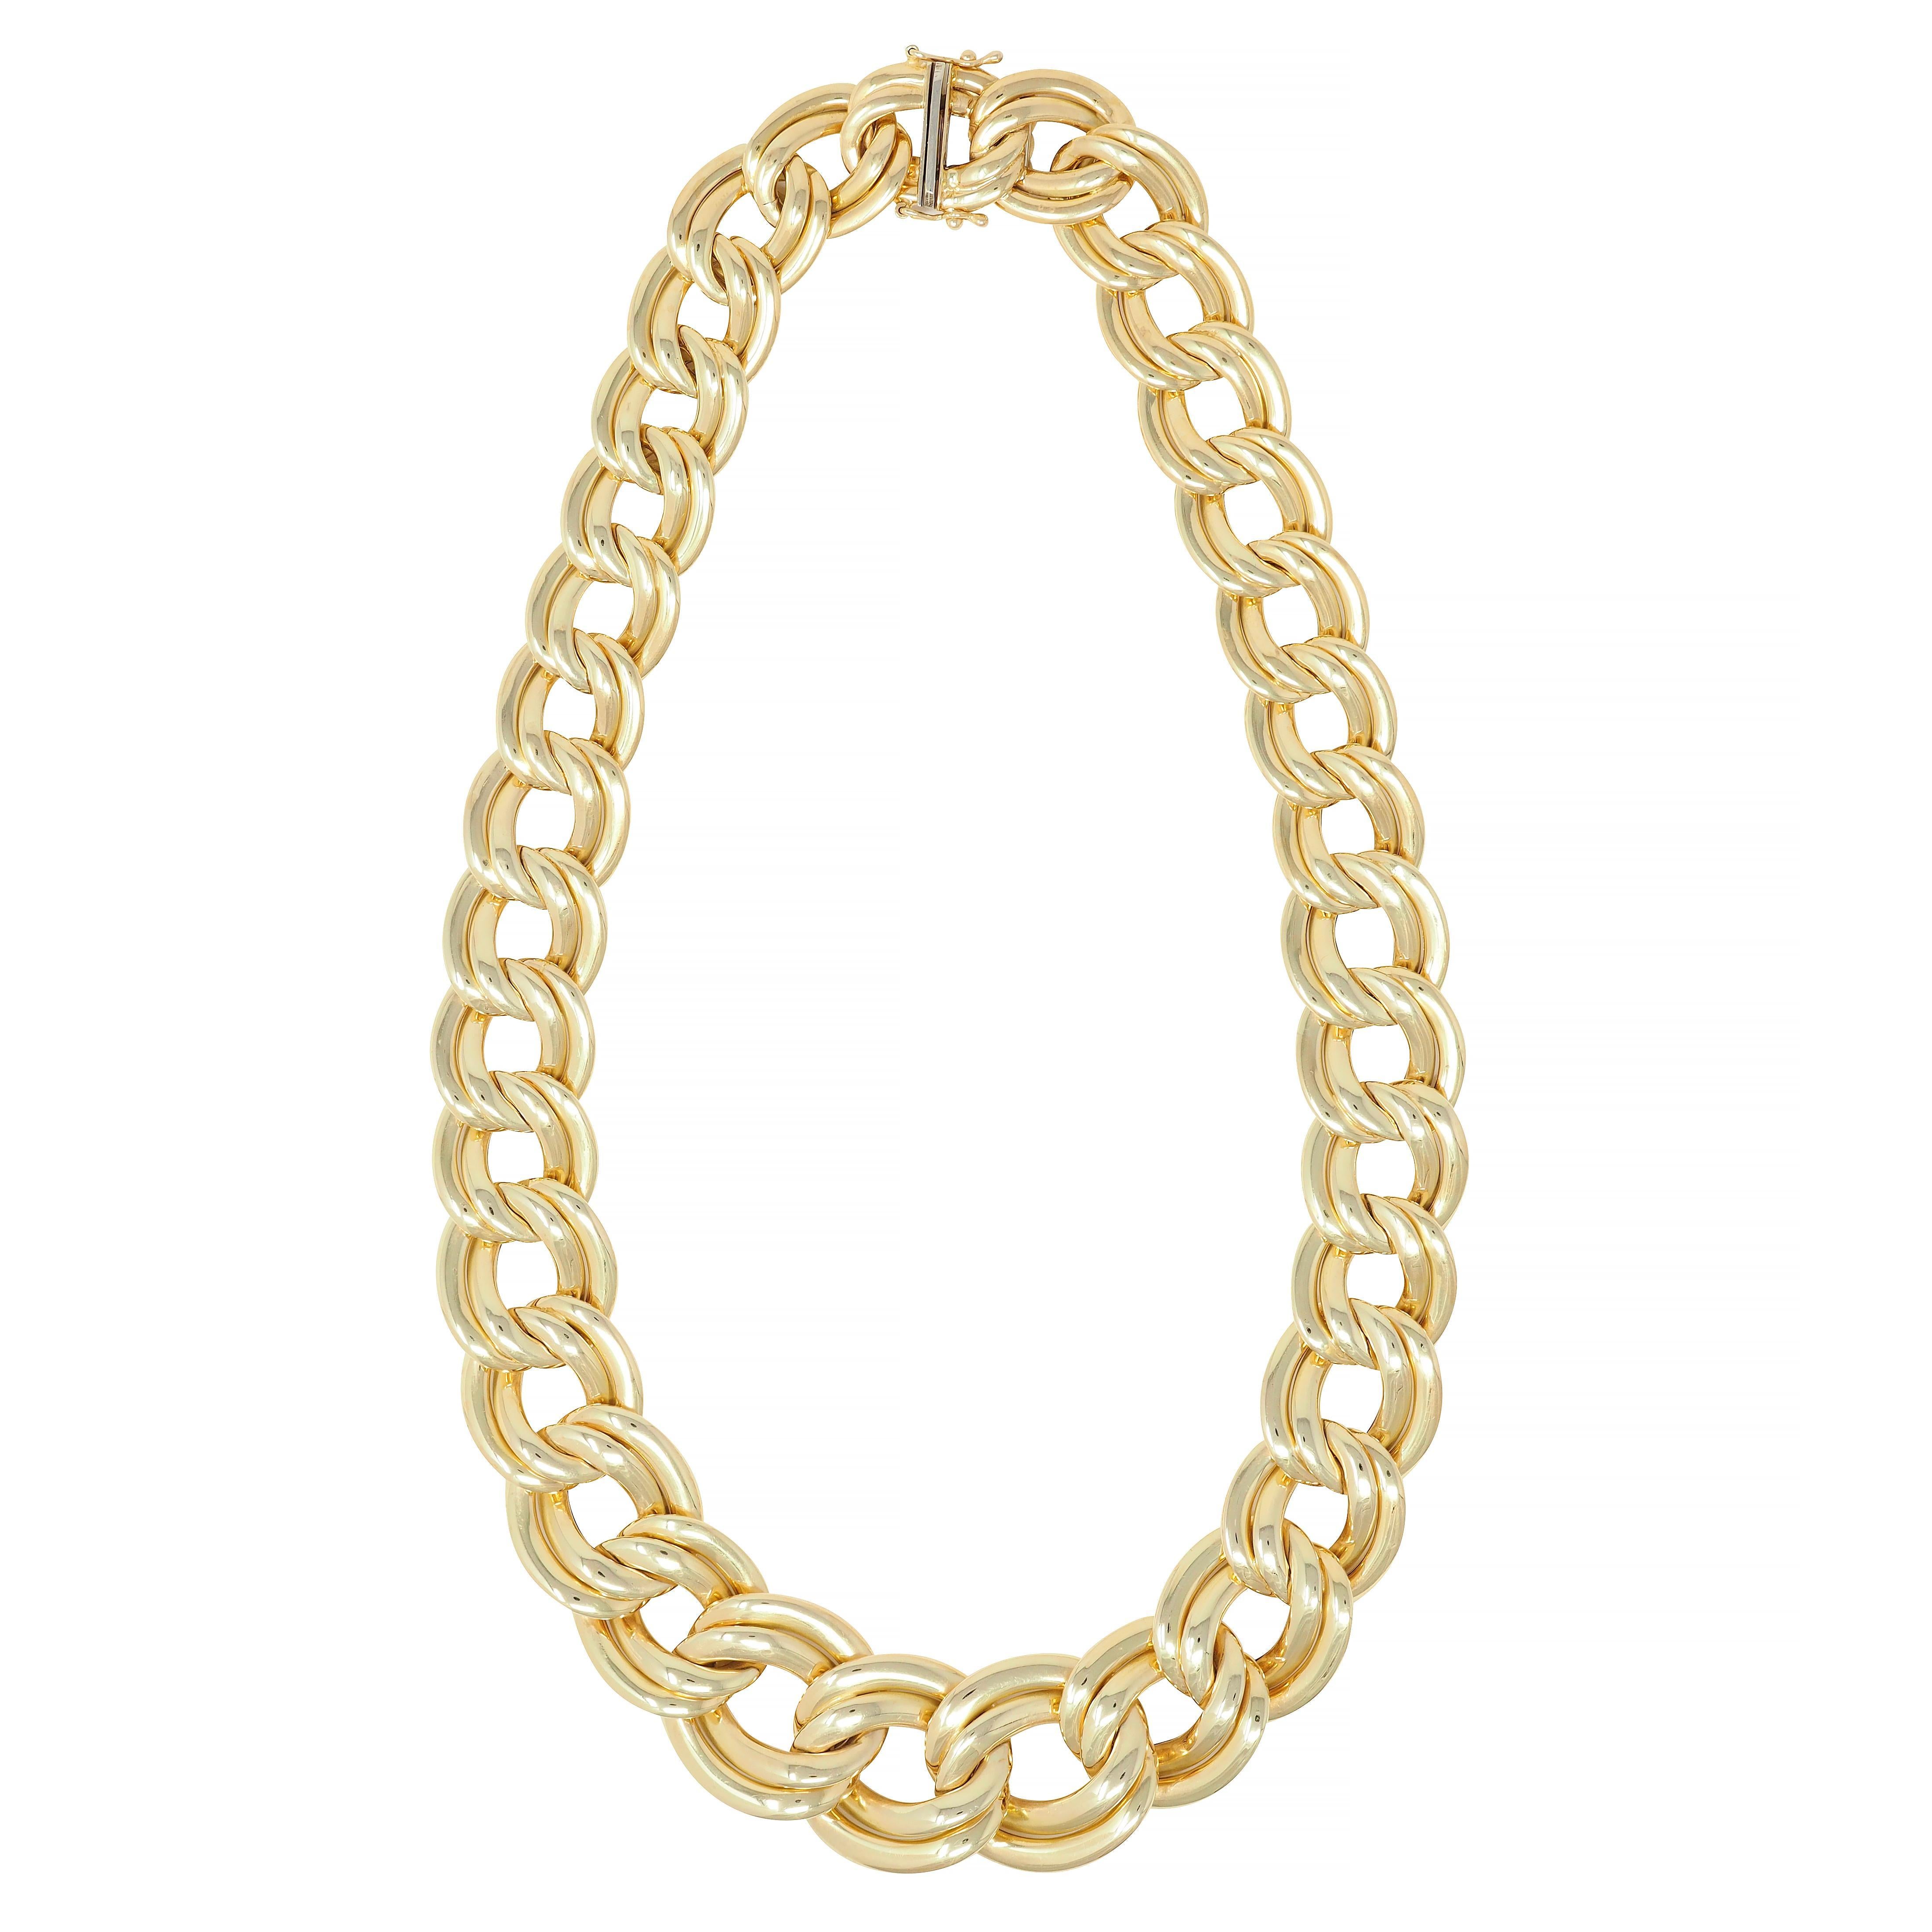 Comprised of oval shaped curb links 
Doubled and graduated 
With high polish finish
Completed by press release clasp 
With double figure eight safety 
Stamped for 14 karat gold
Stamped for Italy
Circa: 1980s
Width at Widest: 1 inch
Total Length: 17